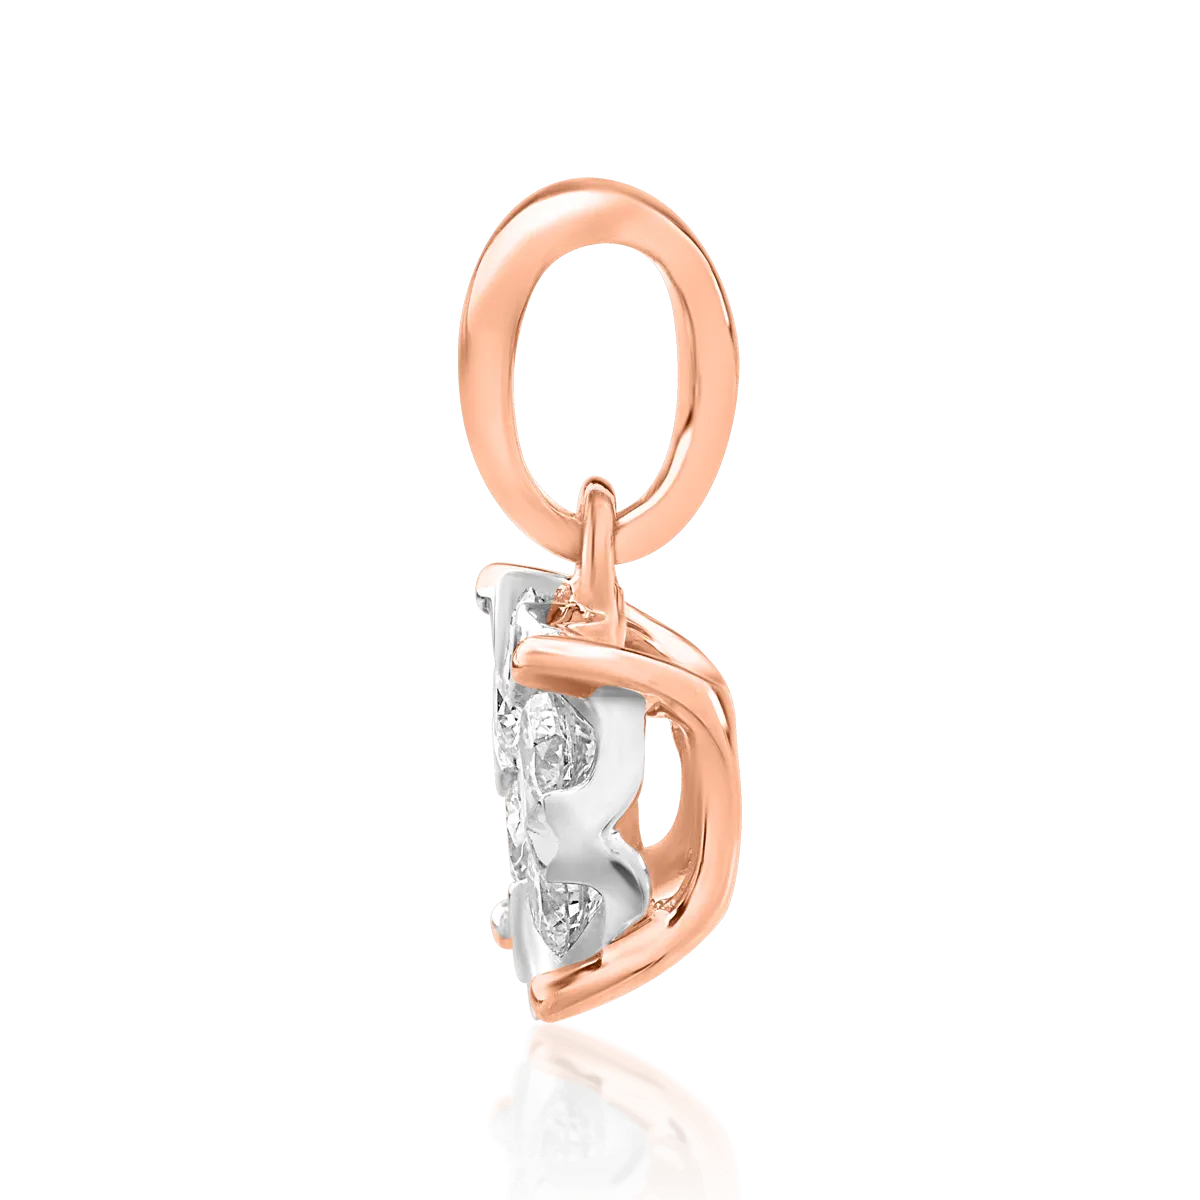 18K rose gold pendant with diamonds of 0.34ct